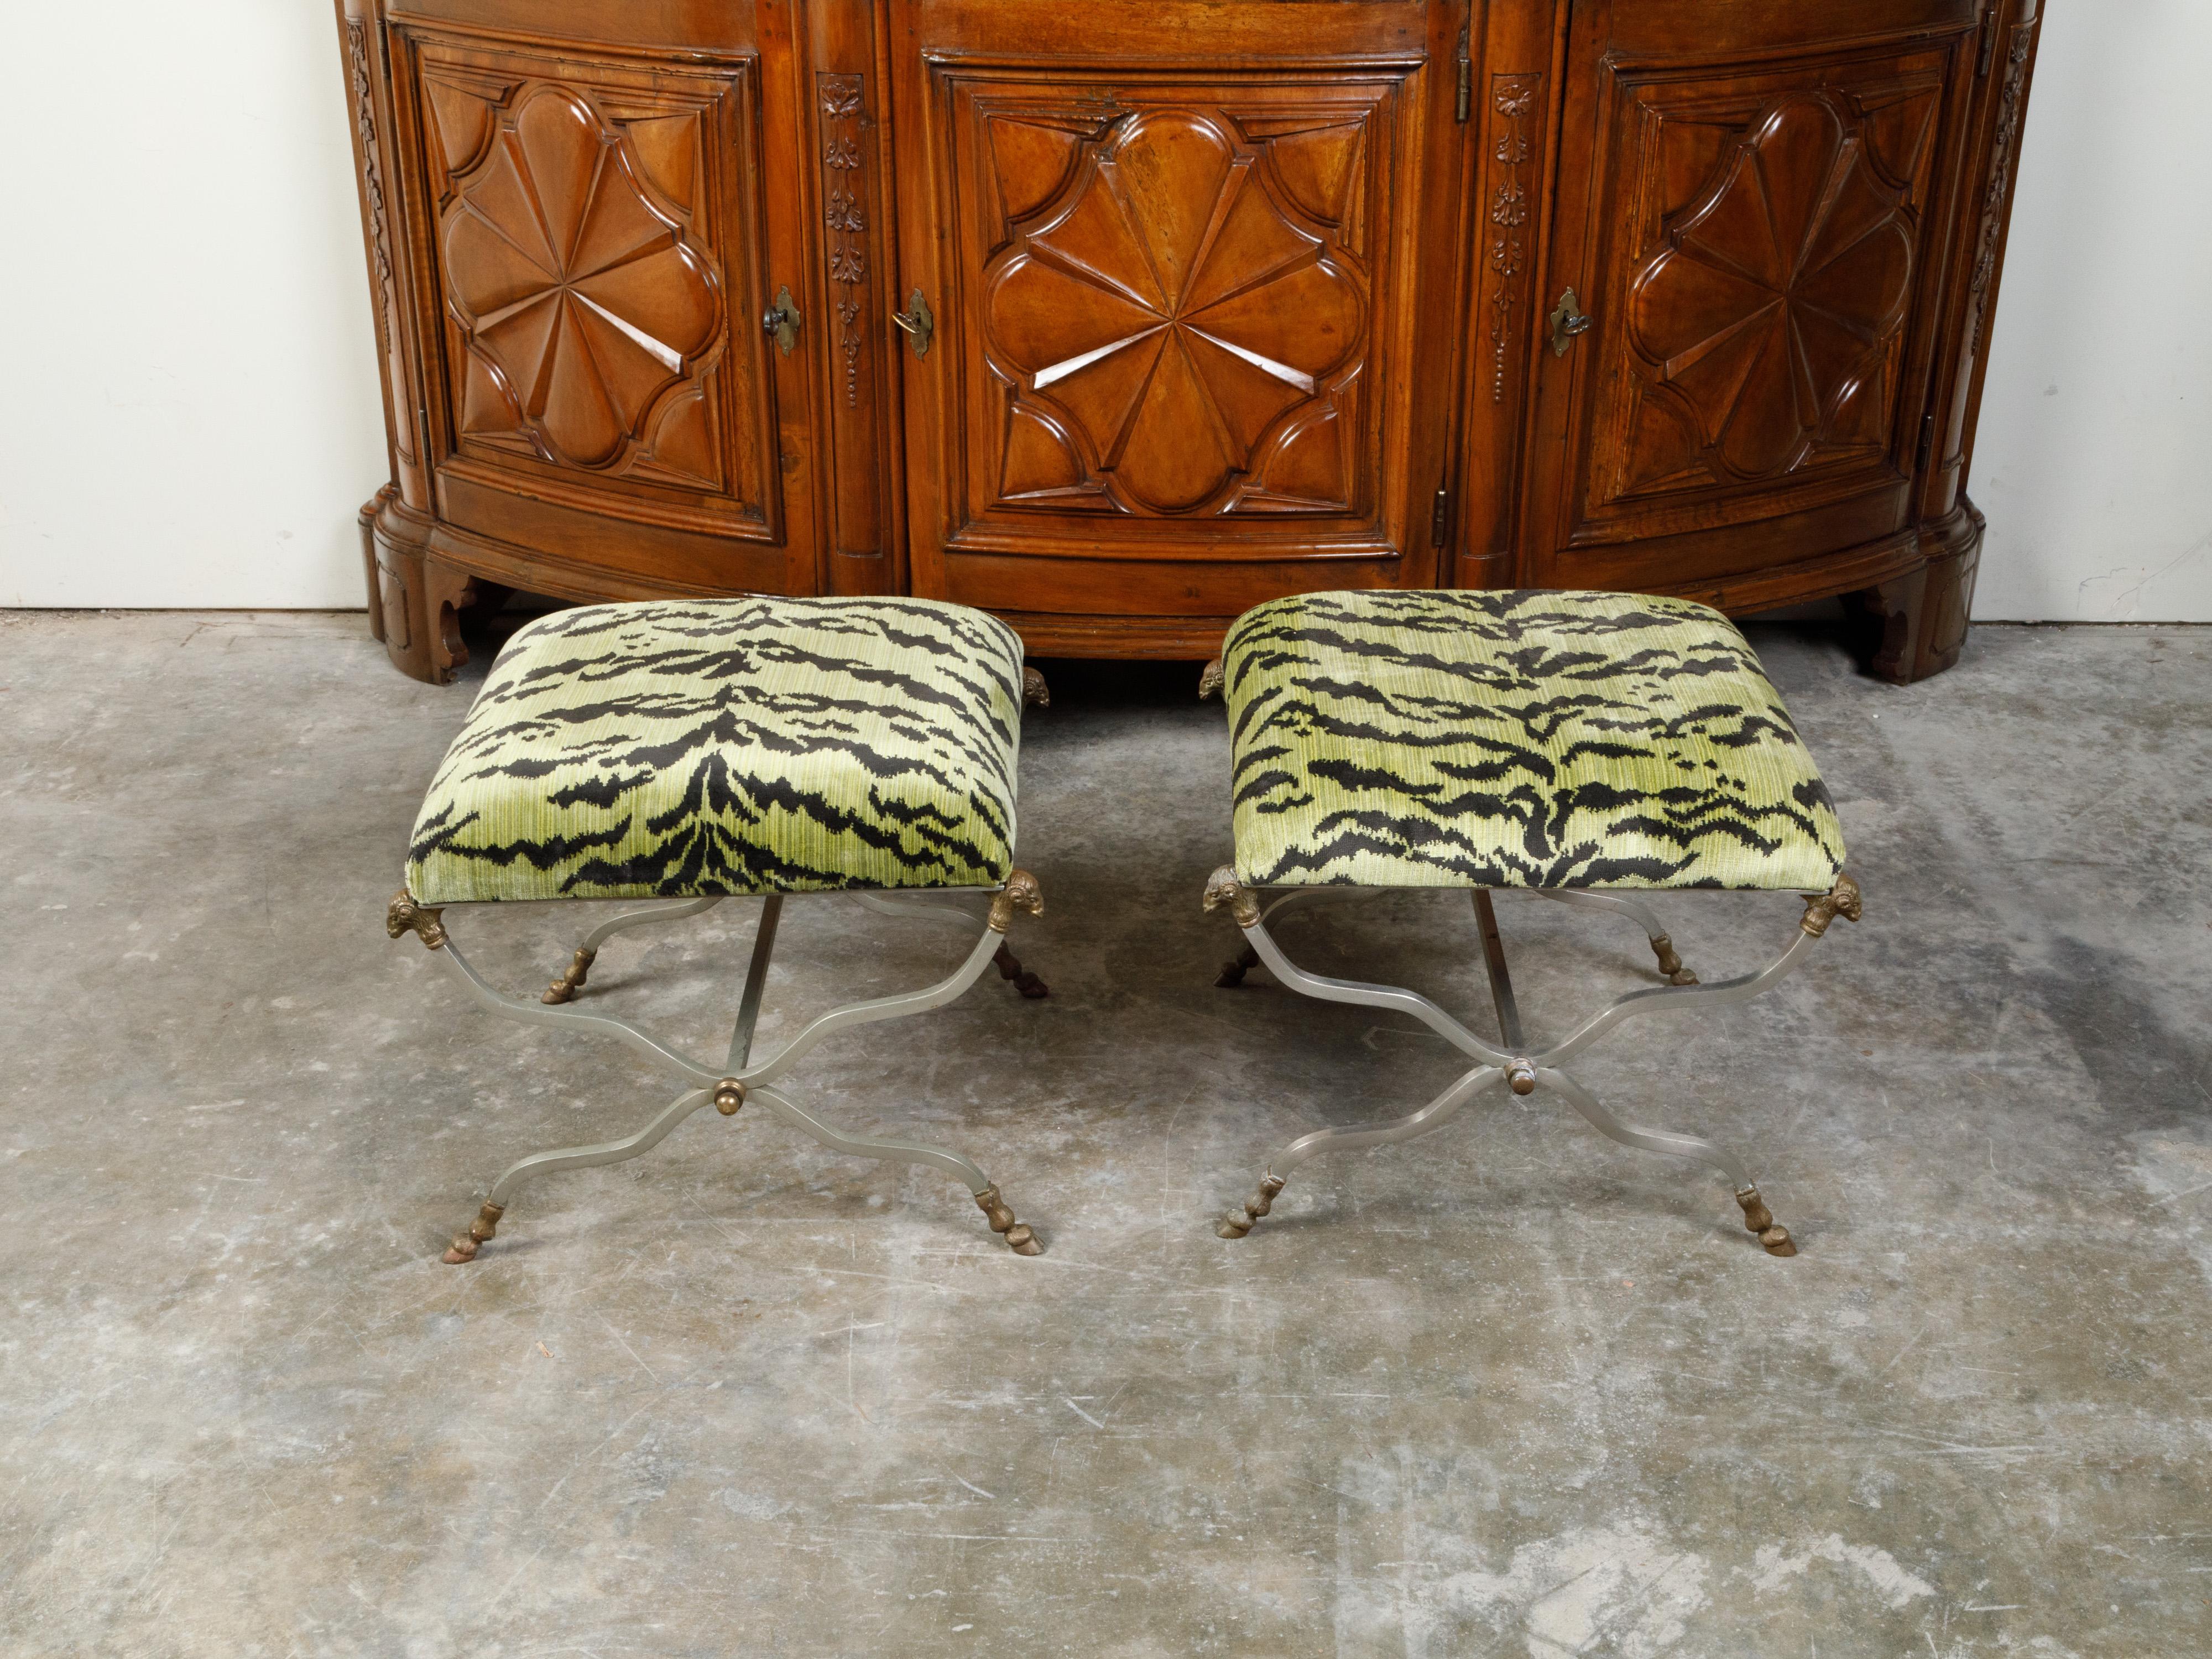 A pair of Italian Maison Jansen style steel and brass stools from the mid-20th century, with rams' heads and faux tiger upholstered seats. Created in Italy during the midcentury period, each of this pair of stools features a rectangular light green